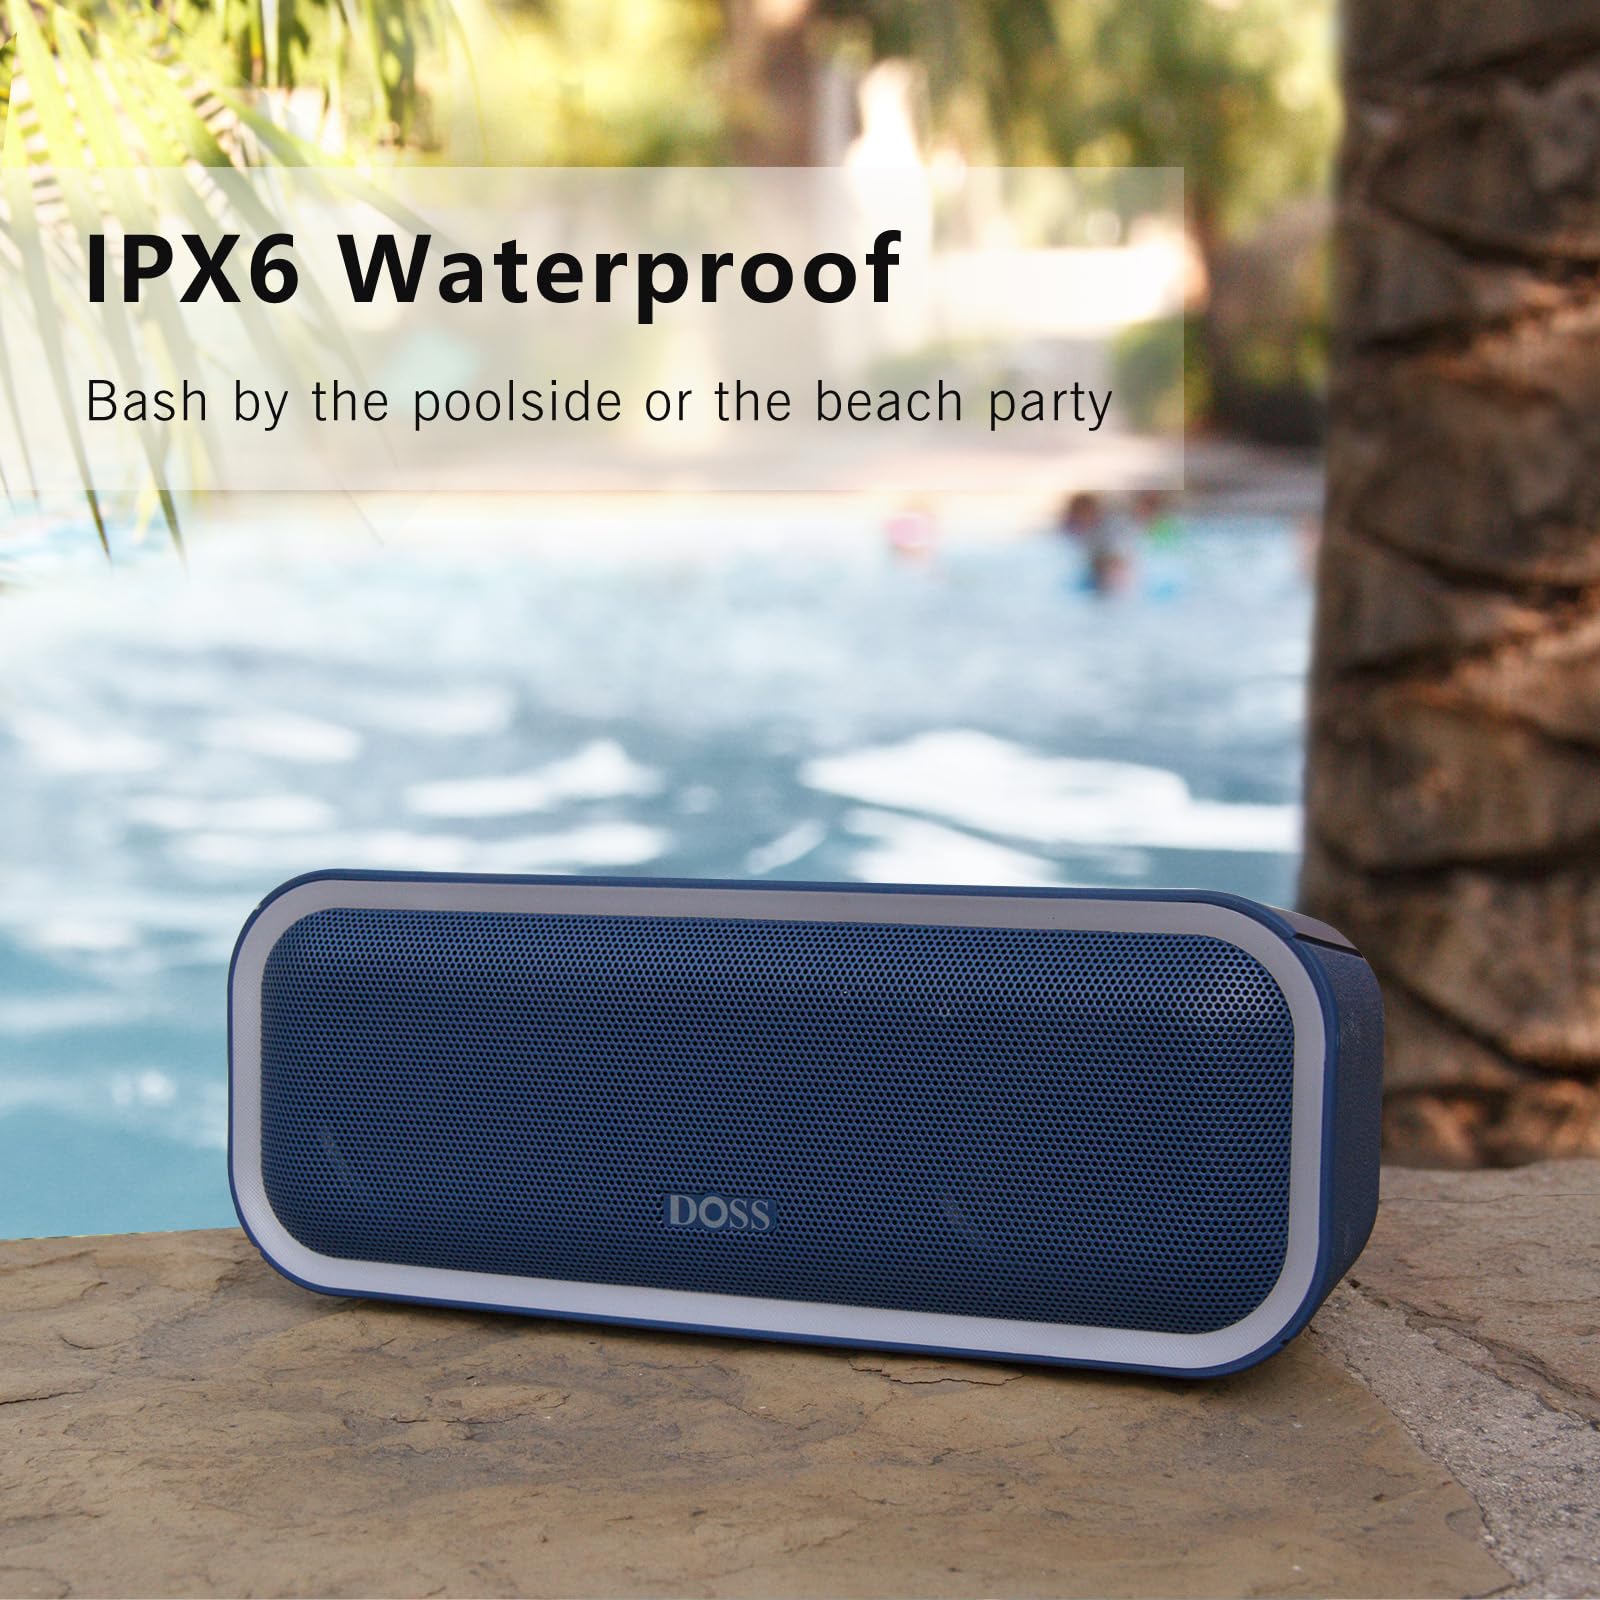 DOSS Bluetooth Speaker, SoundBox Pro+ Wireless Bluetooth Speaker with 24W Impressive Sound, Booming Bass, IPX6 Waterproof, 15Hrs Playtime, Wireless Stereo Pairing, Mixed Colors Lights, 66 FT - Blue